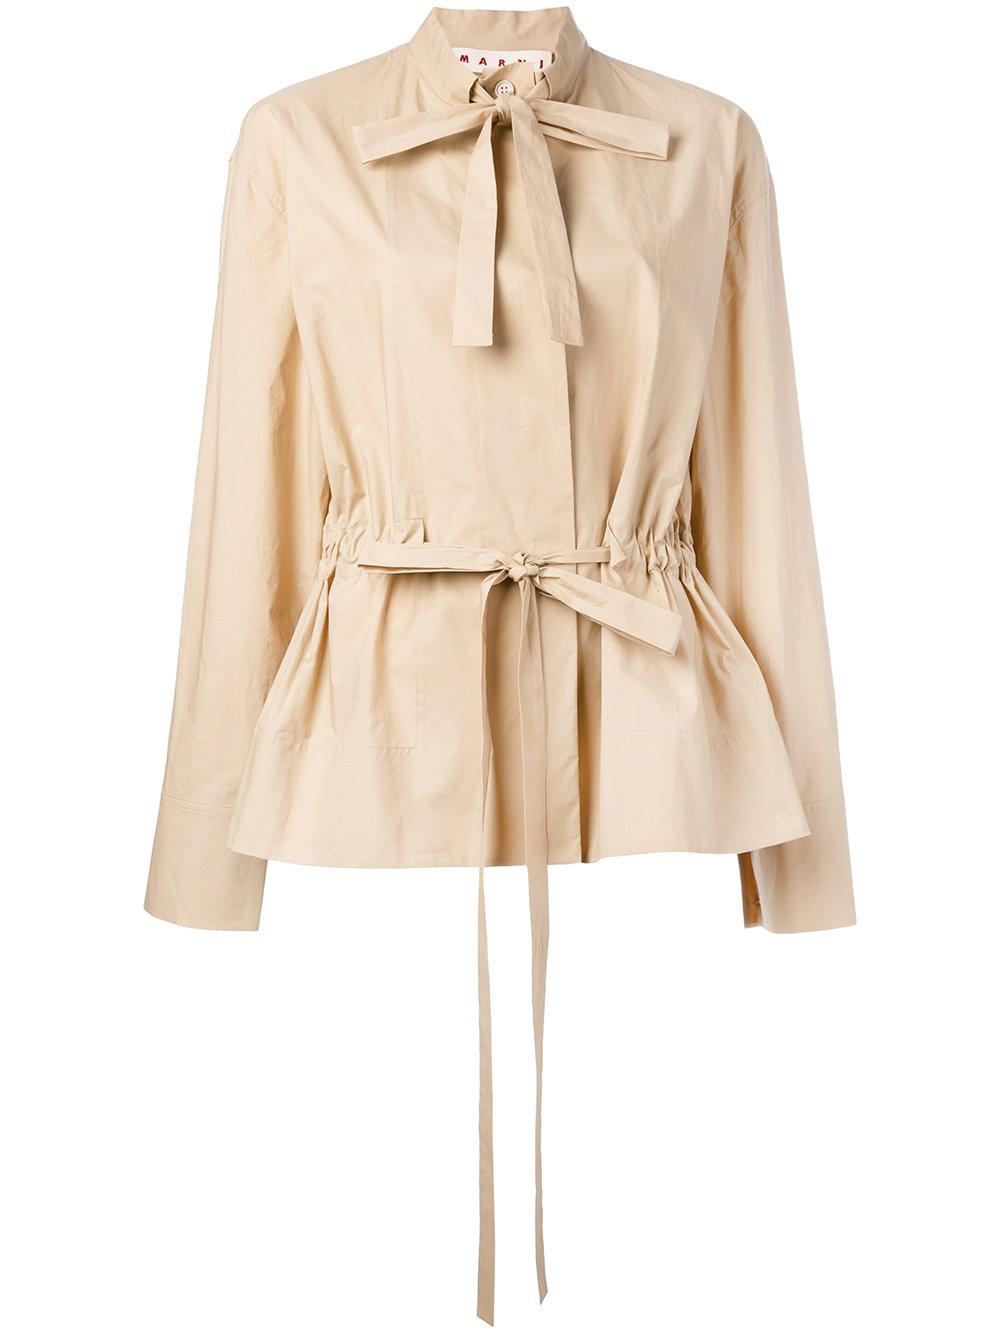 Lyst - Marni Pussy Bow Military Blouse in Natural